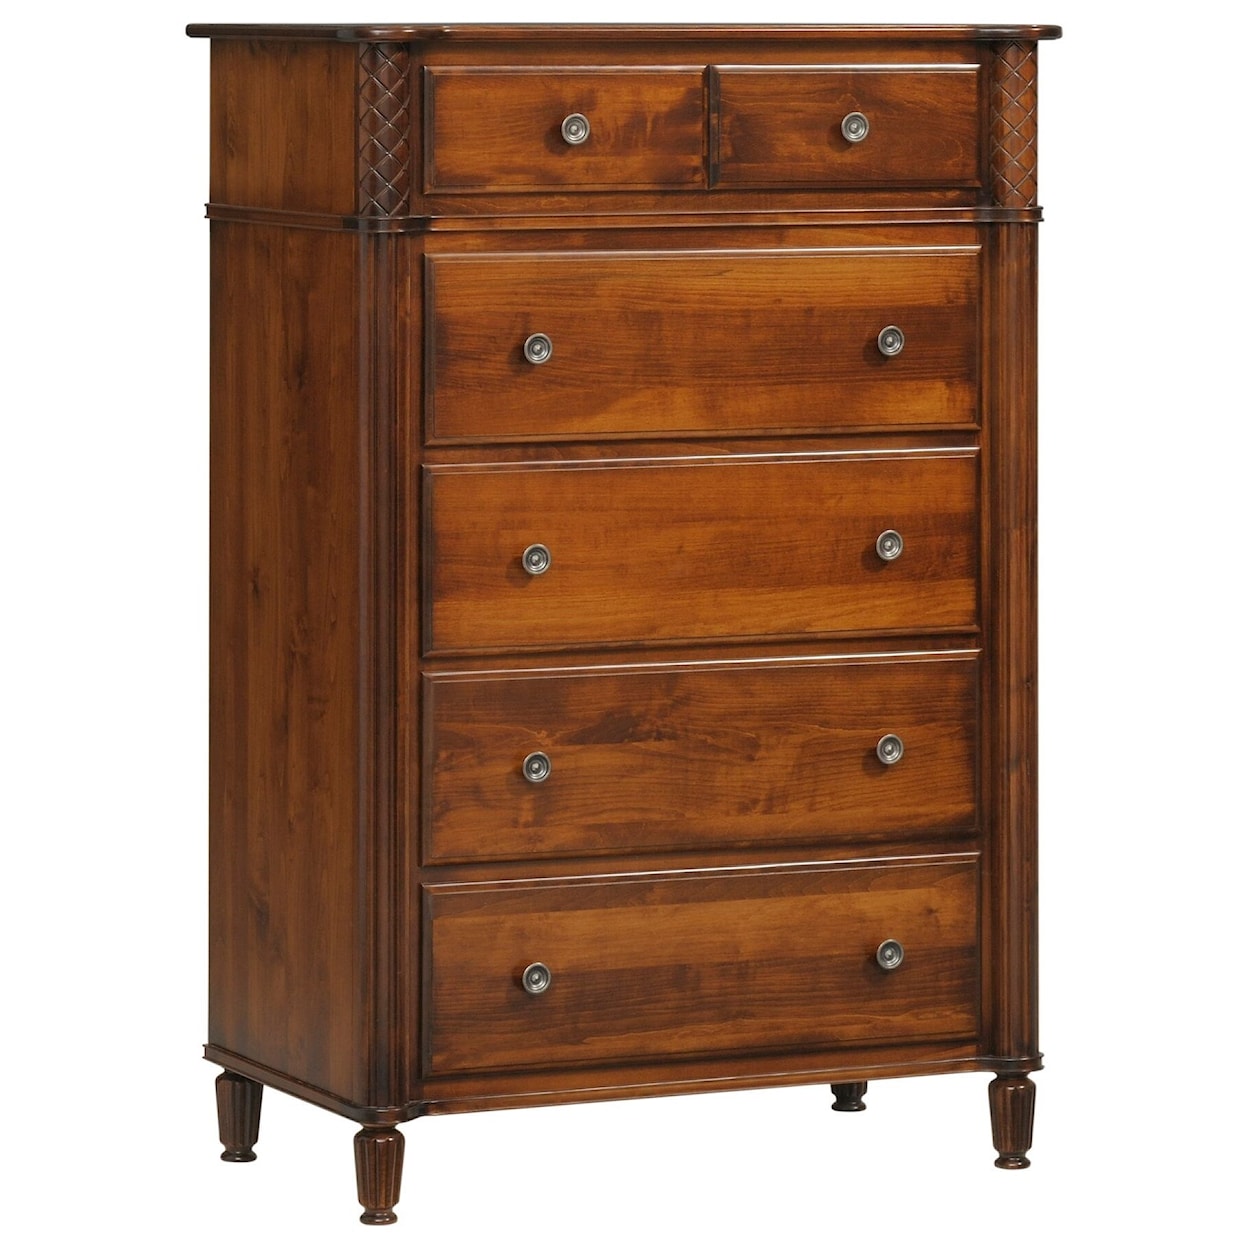 Millcraft Eminence Chest of Drawers